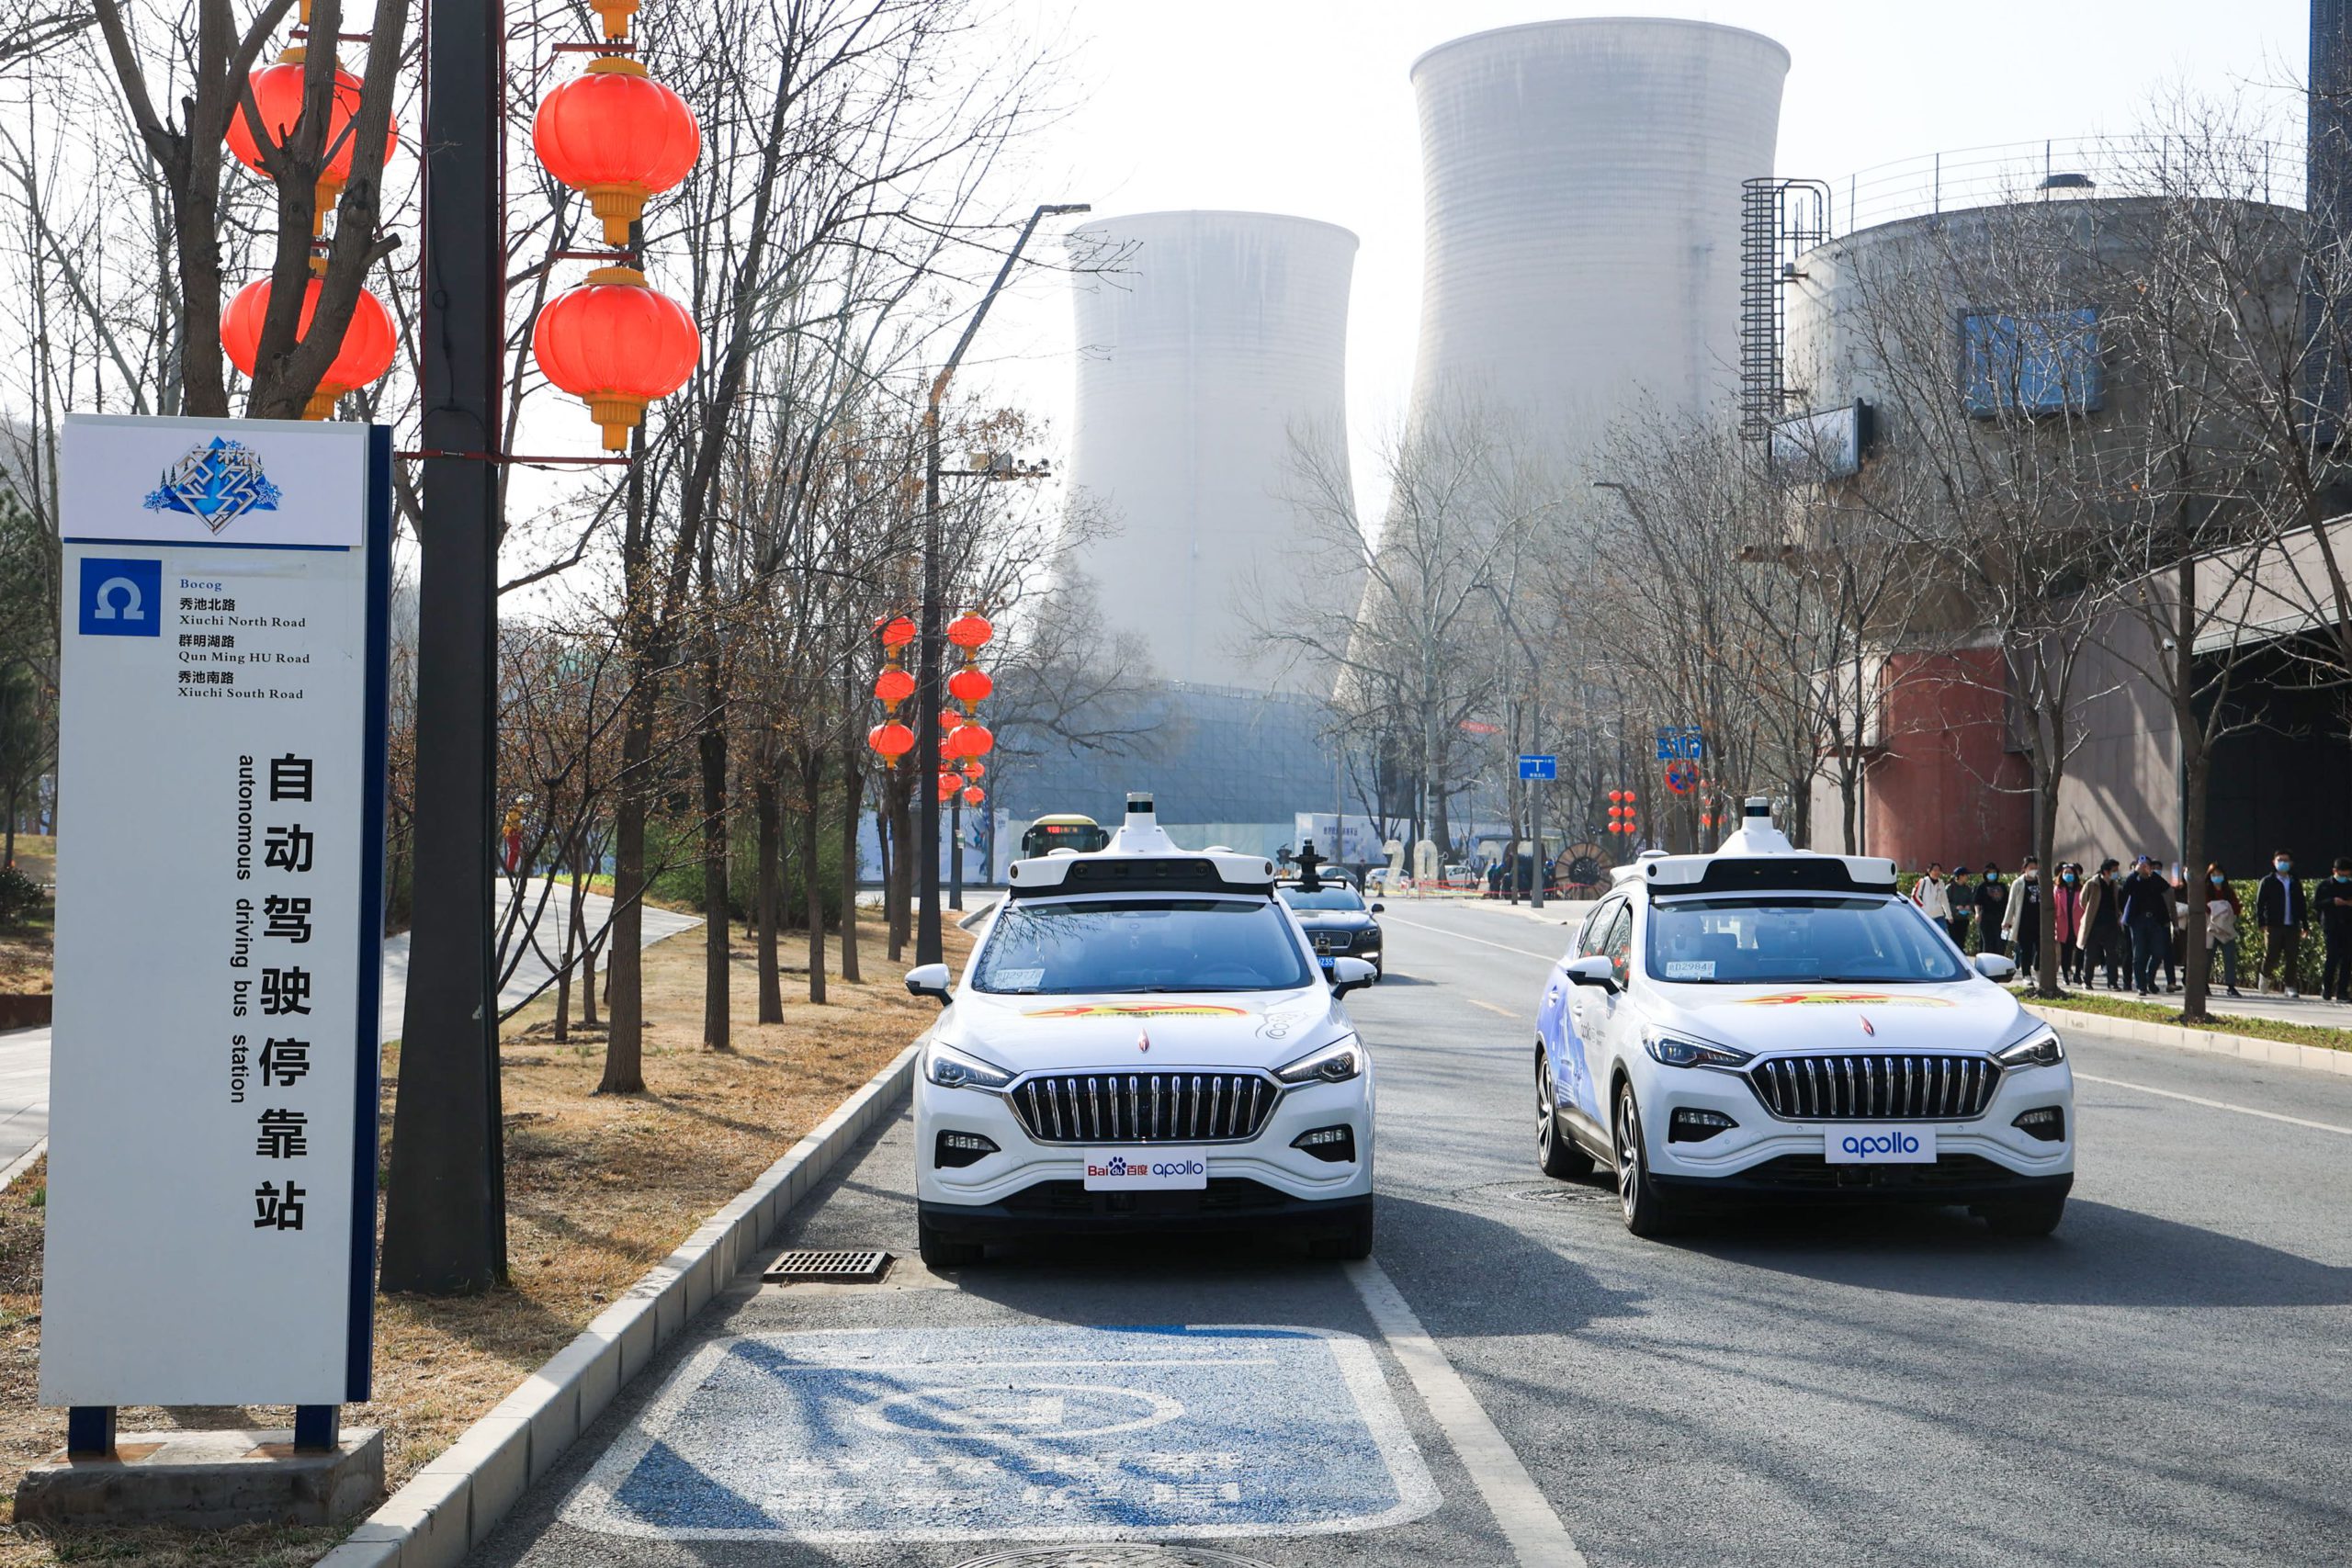 Baidu will charge for fully driverless robotaxi rides in Beijing from May